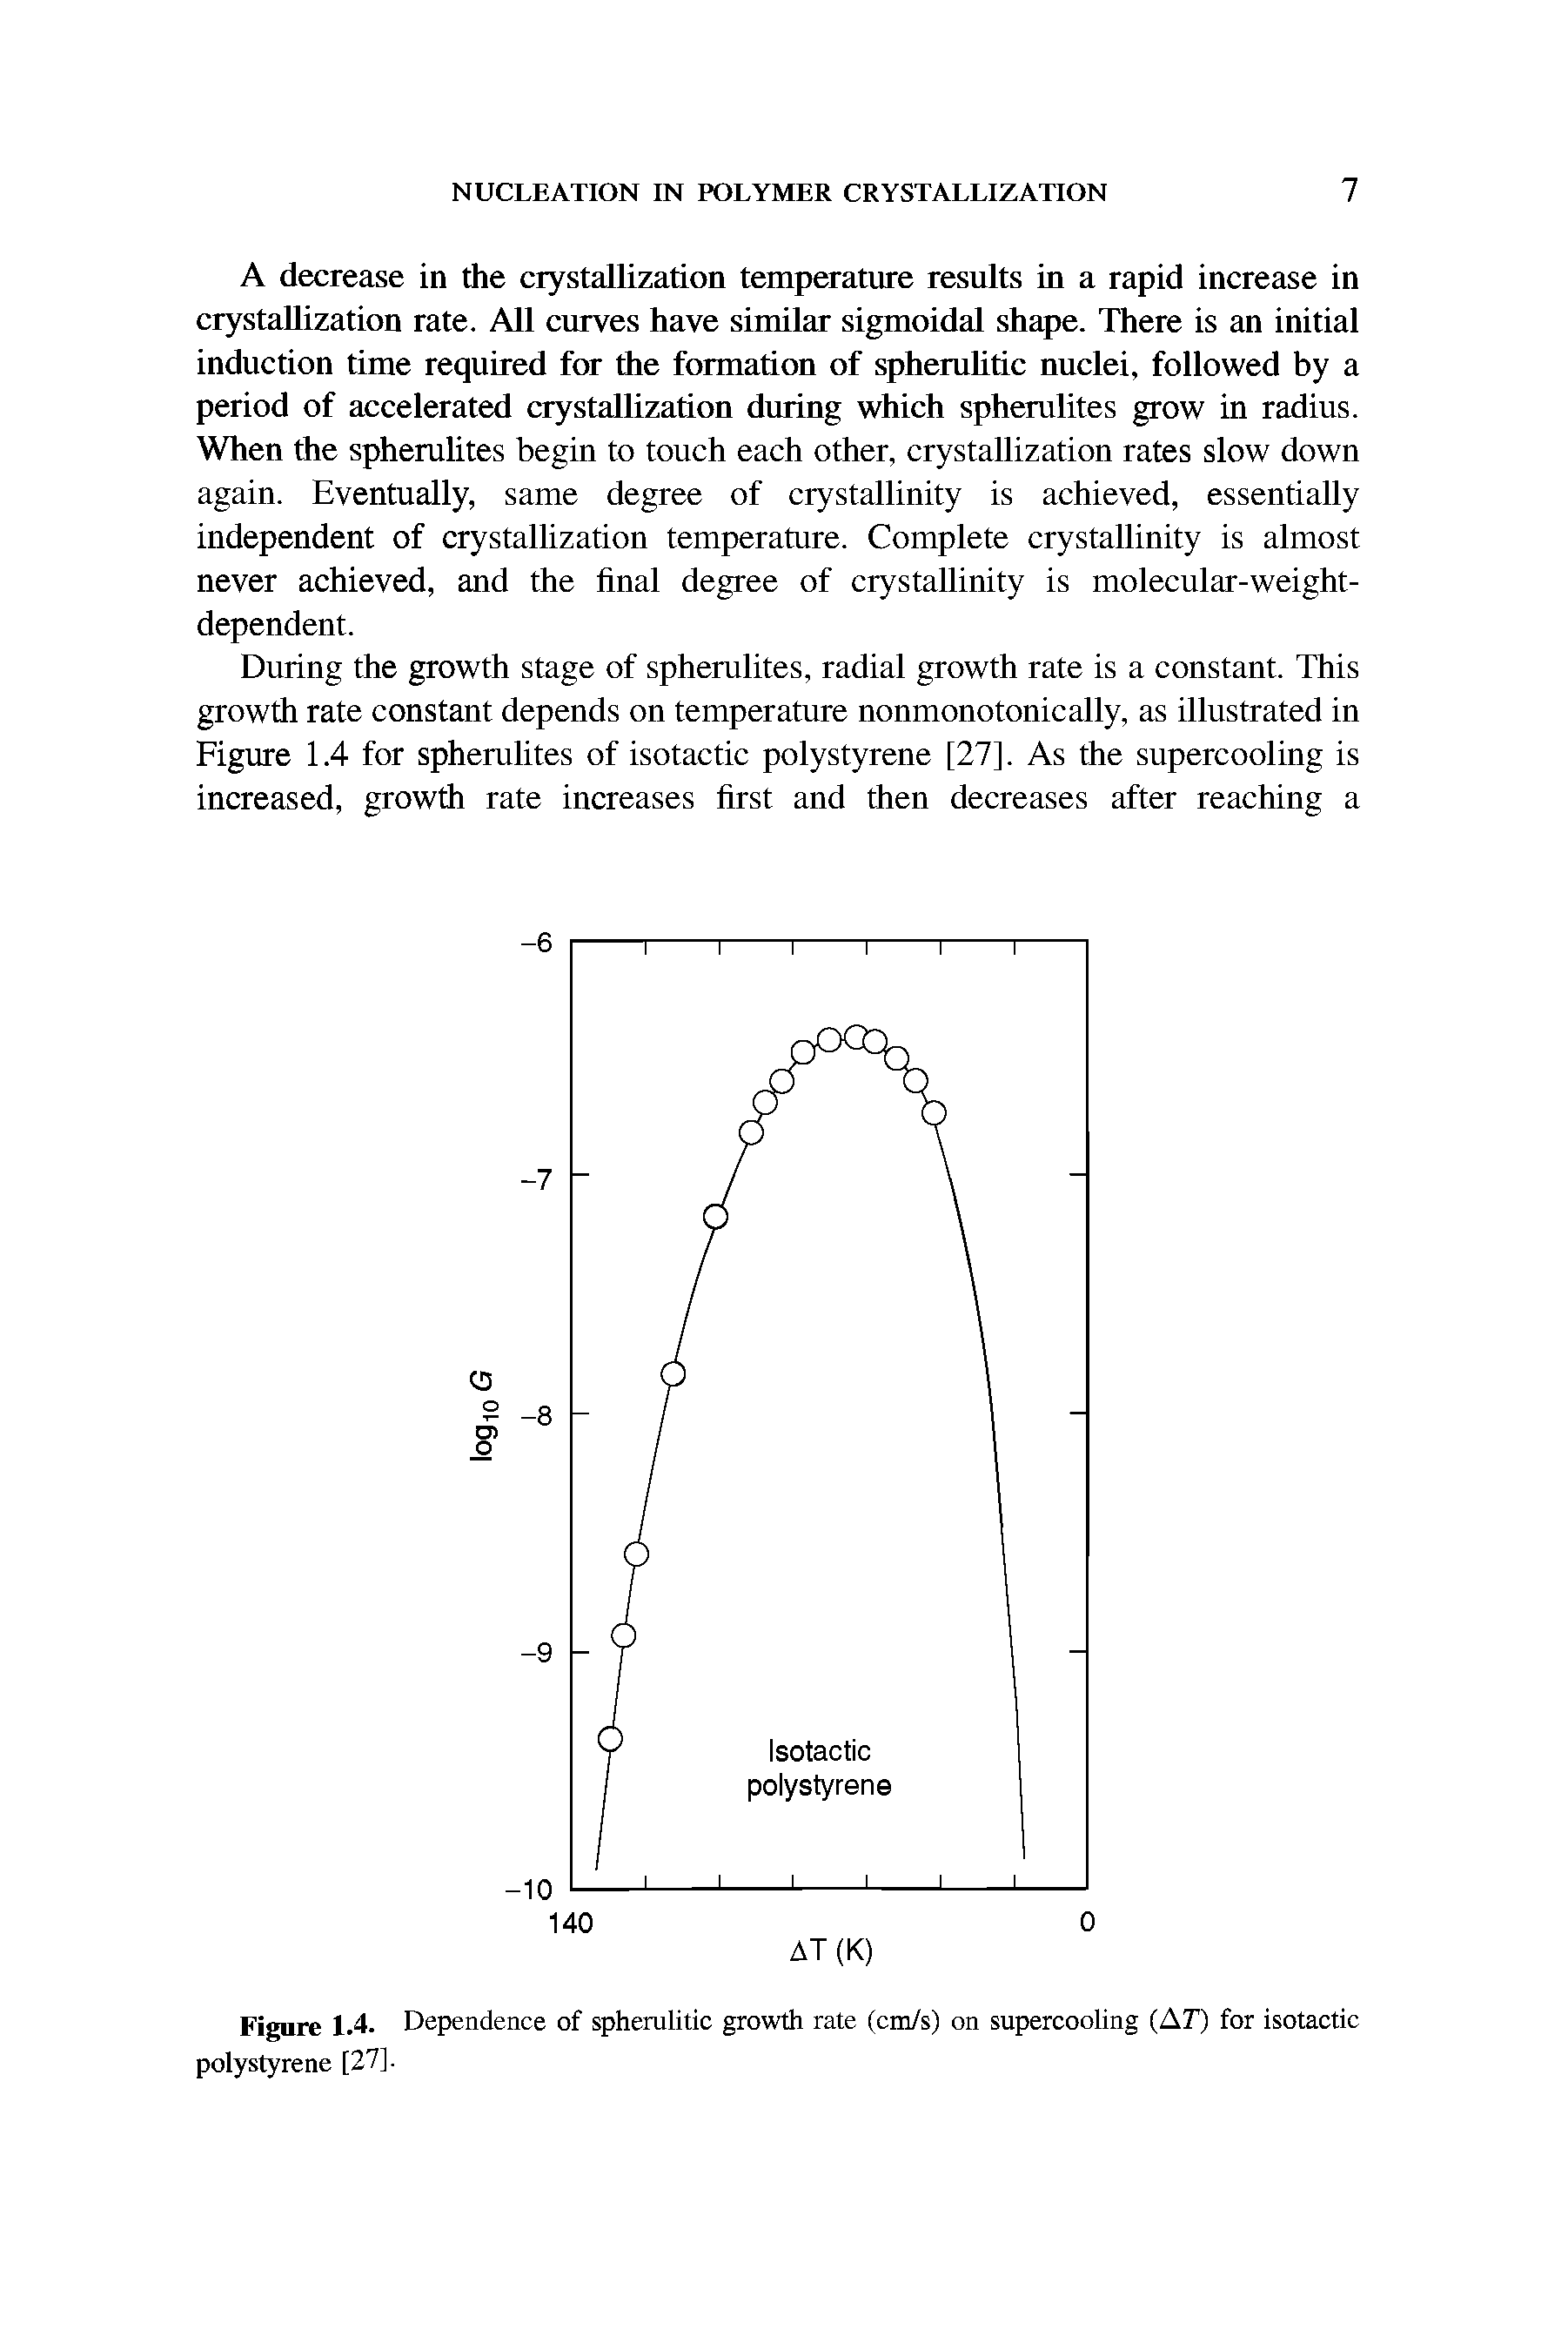 Figure 1.4- Dependence of spheralitic growth rate (cm/s) on supercooling (AT) for isotactic polystyrene [27].